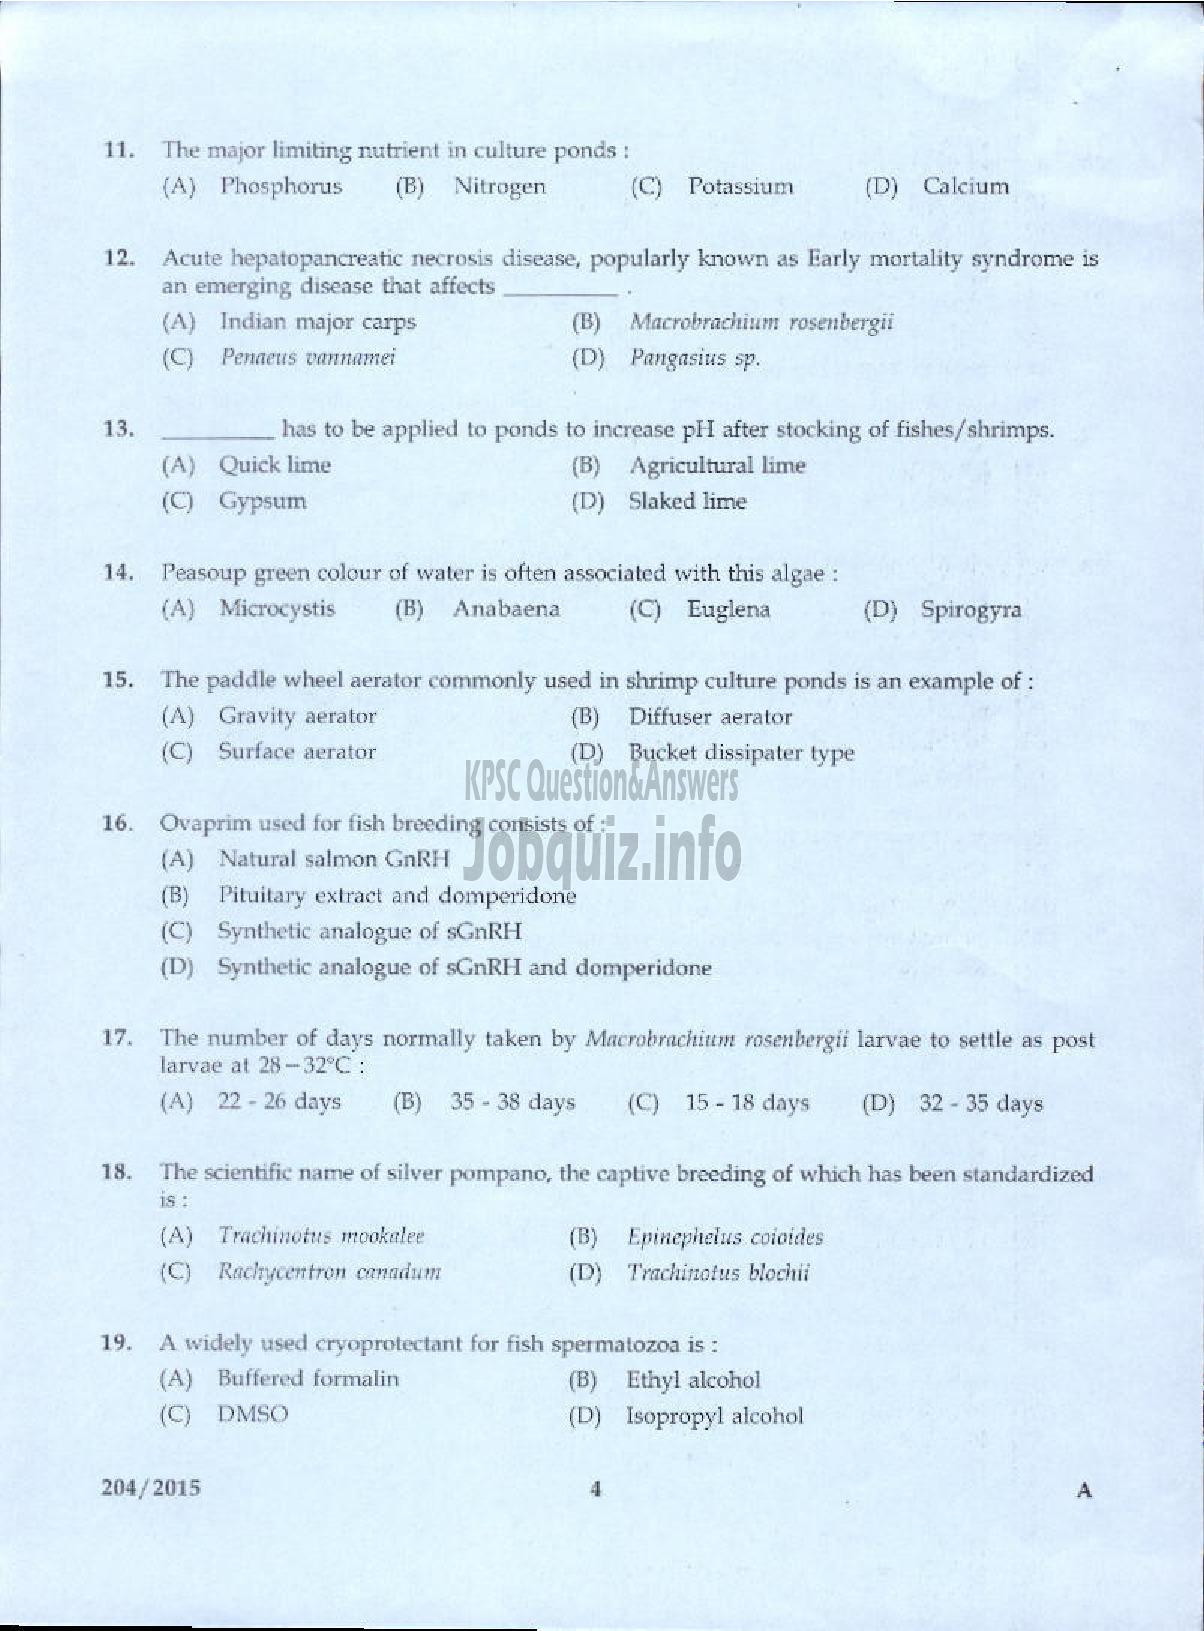 Kerala PSC Question Paper - ASSISTANT DIRECTOR OF FISHERIES ZONAL FISHERIES-2